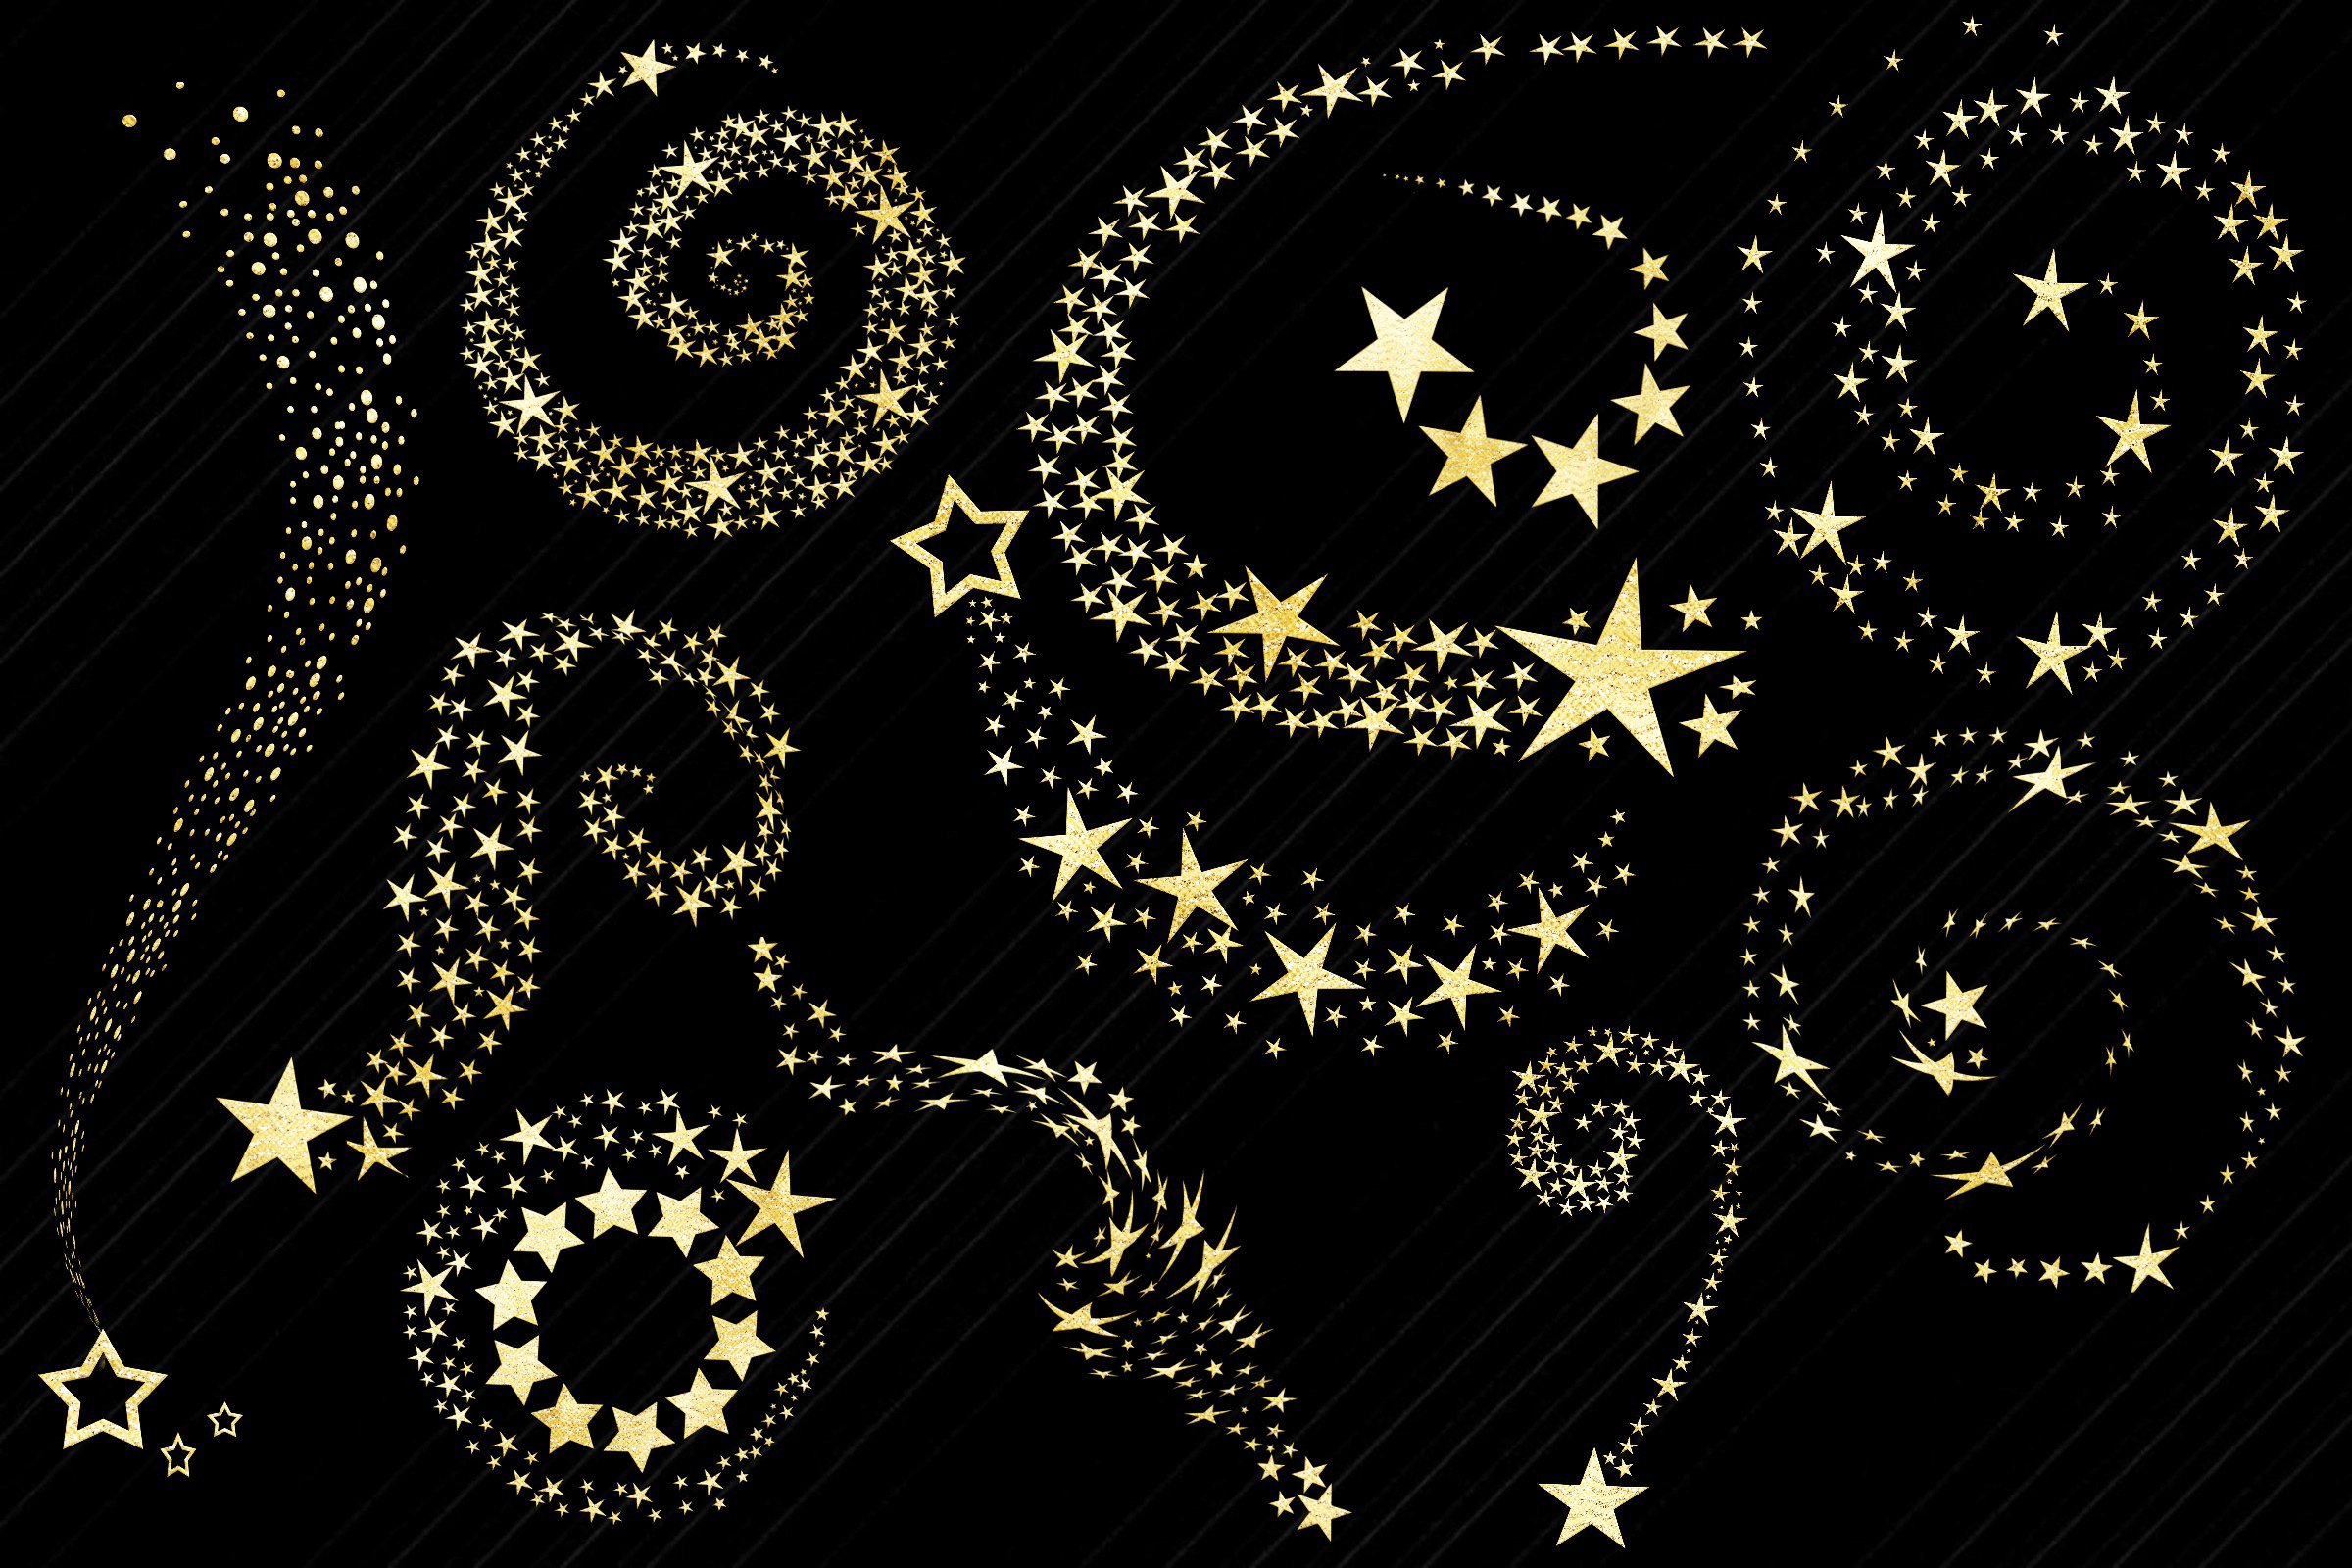 Gold Foil Swirls & Shooting Stars preview image.